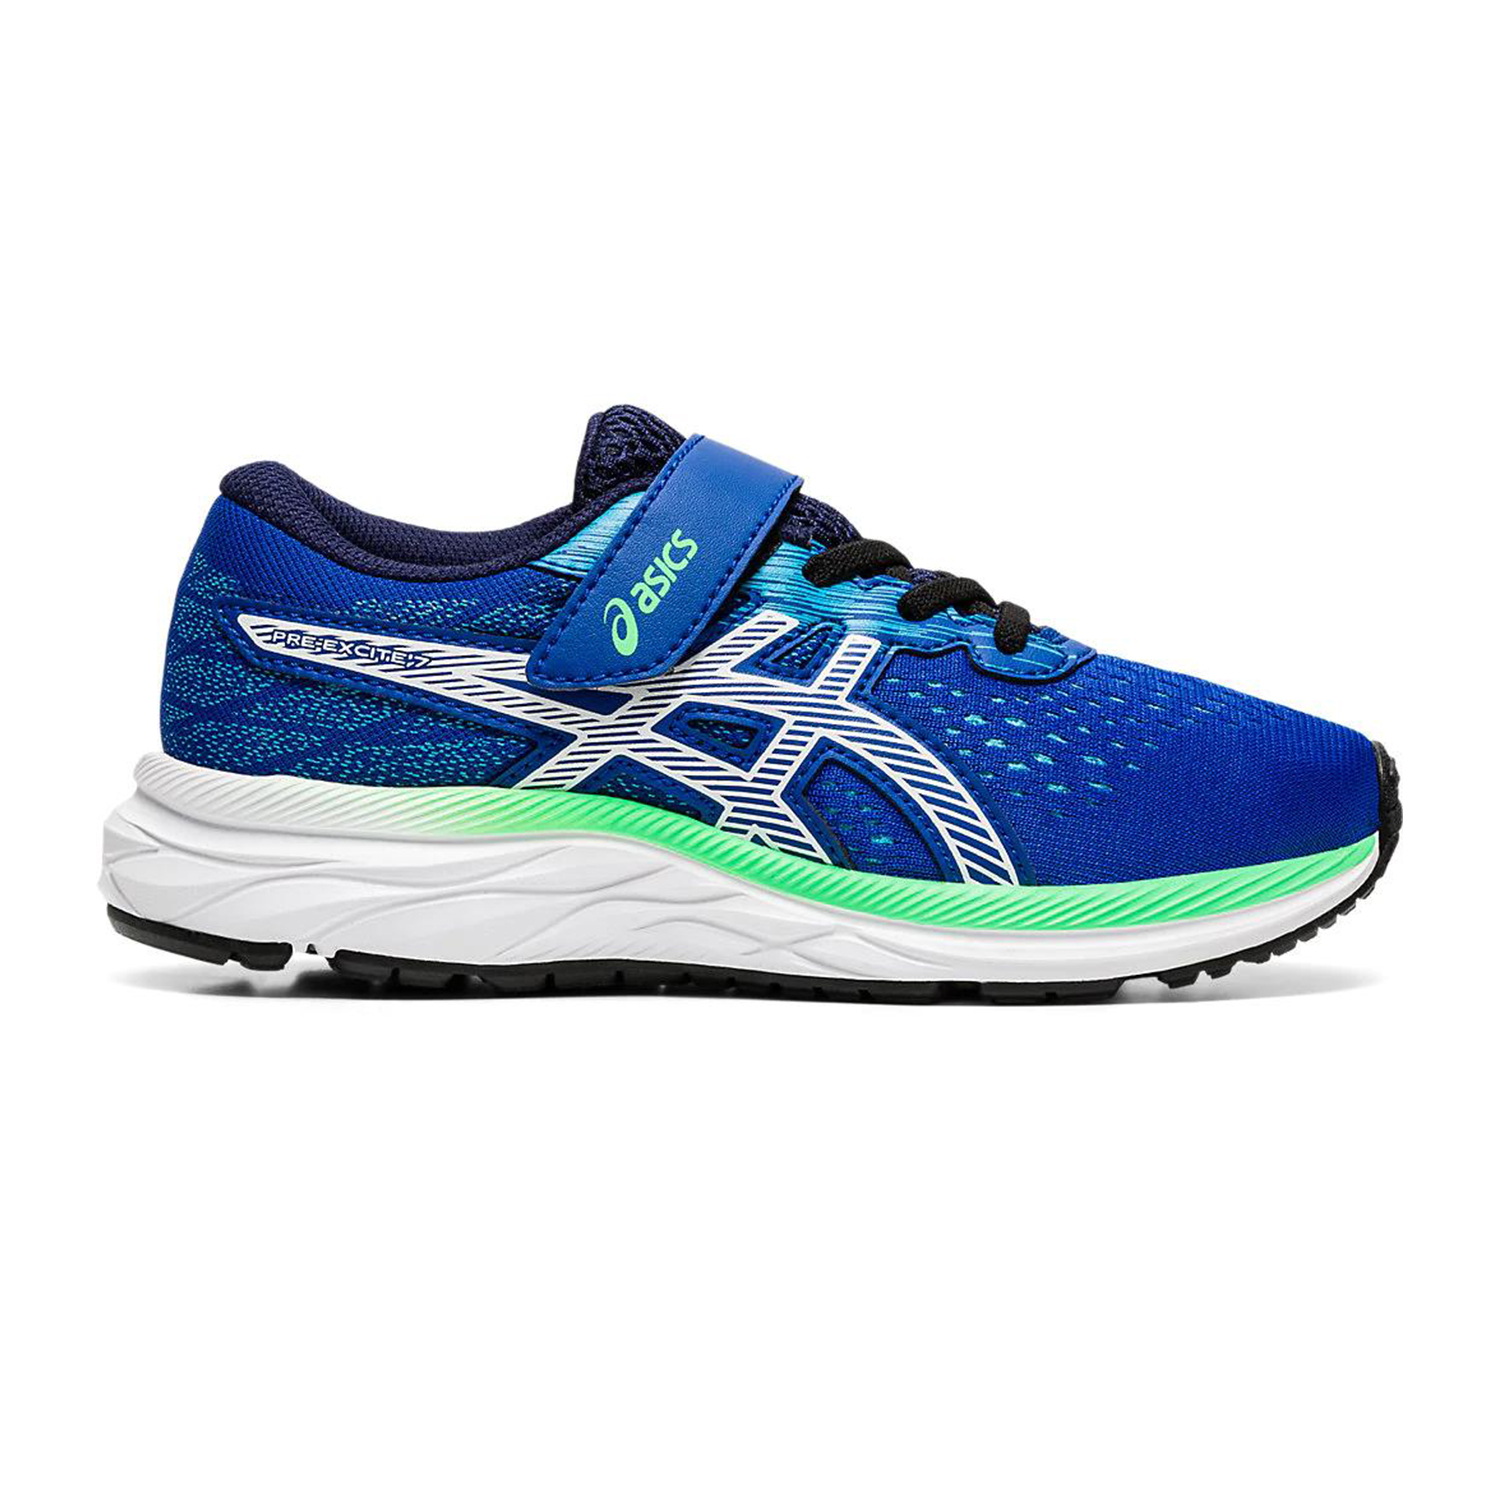 Asics Pre Excite 7 PS ( 1014A101-401 )